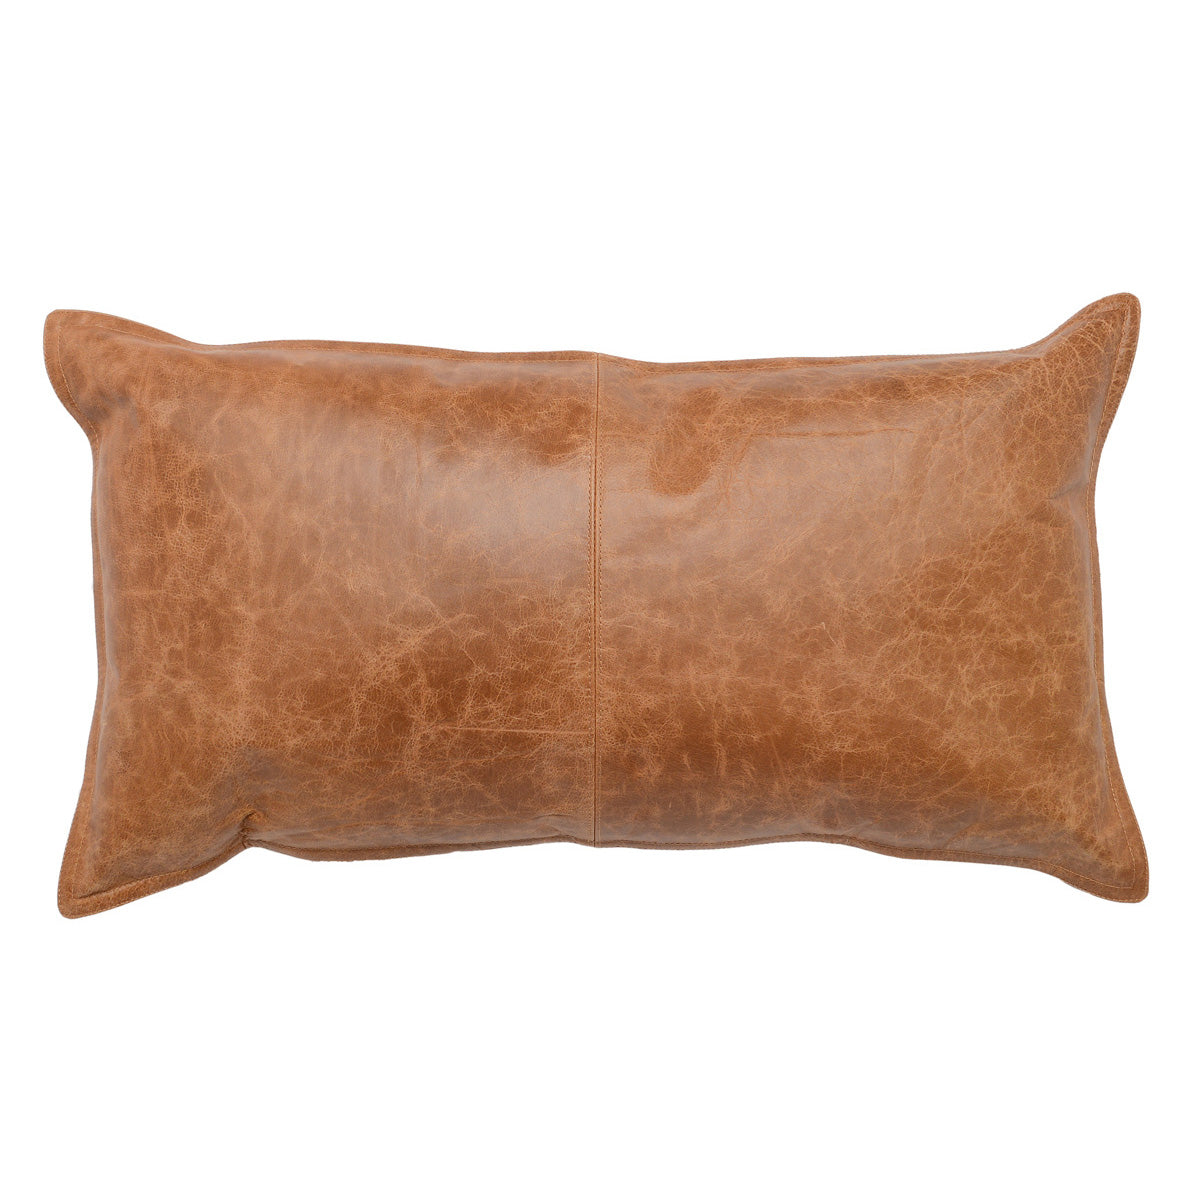 SLD Leather Dumont Chestnut Accent Pillow  14x26